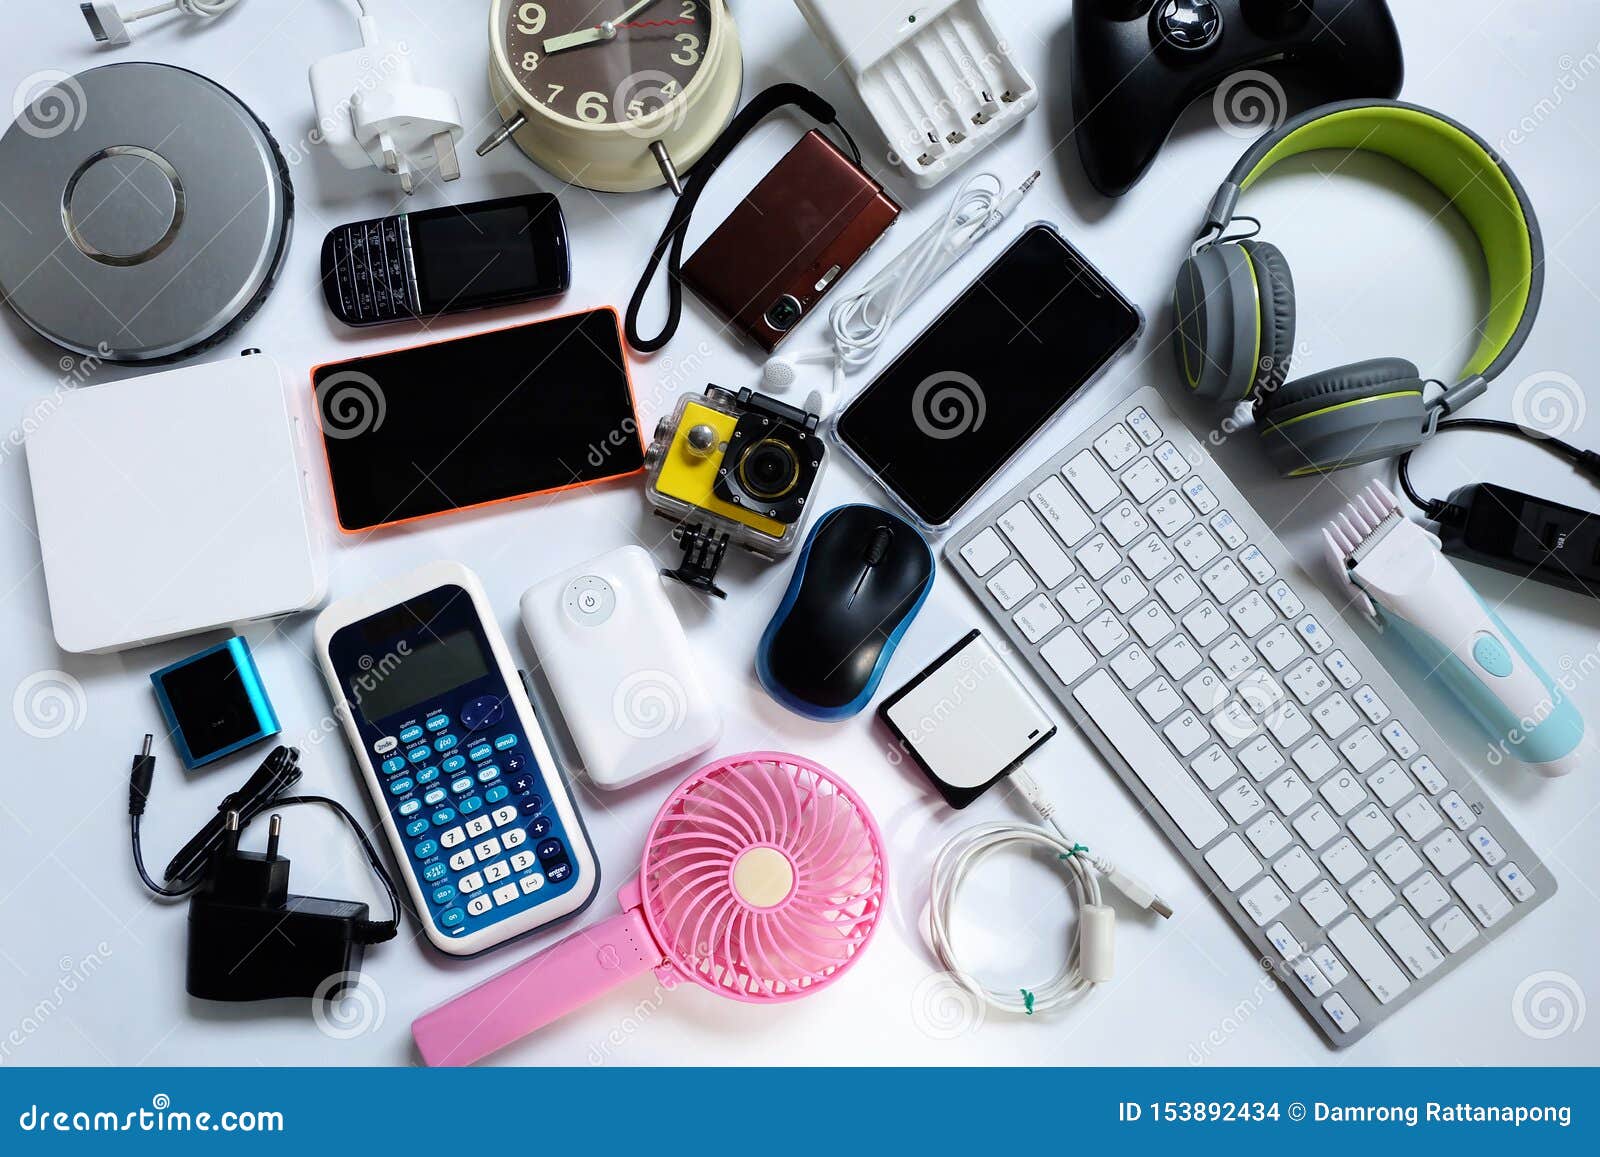 https://thumbs.dreamstime.com/z/many-used-modern-electronic-gadgets-use-white-floor-reuse-recycle-concept-top-view-153892434.jpg